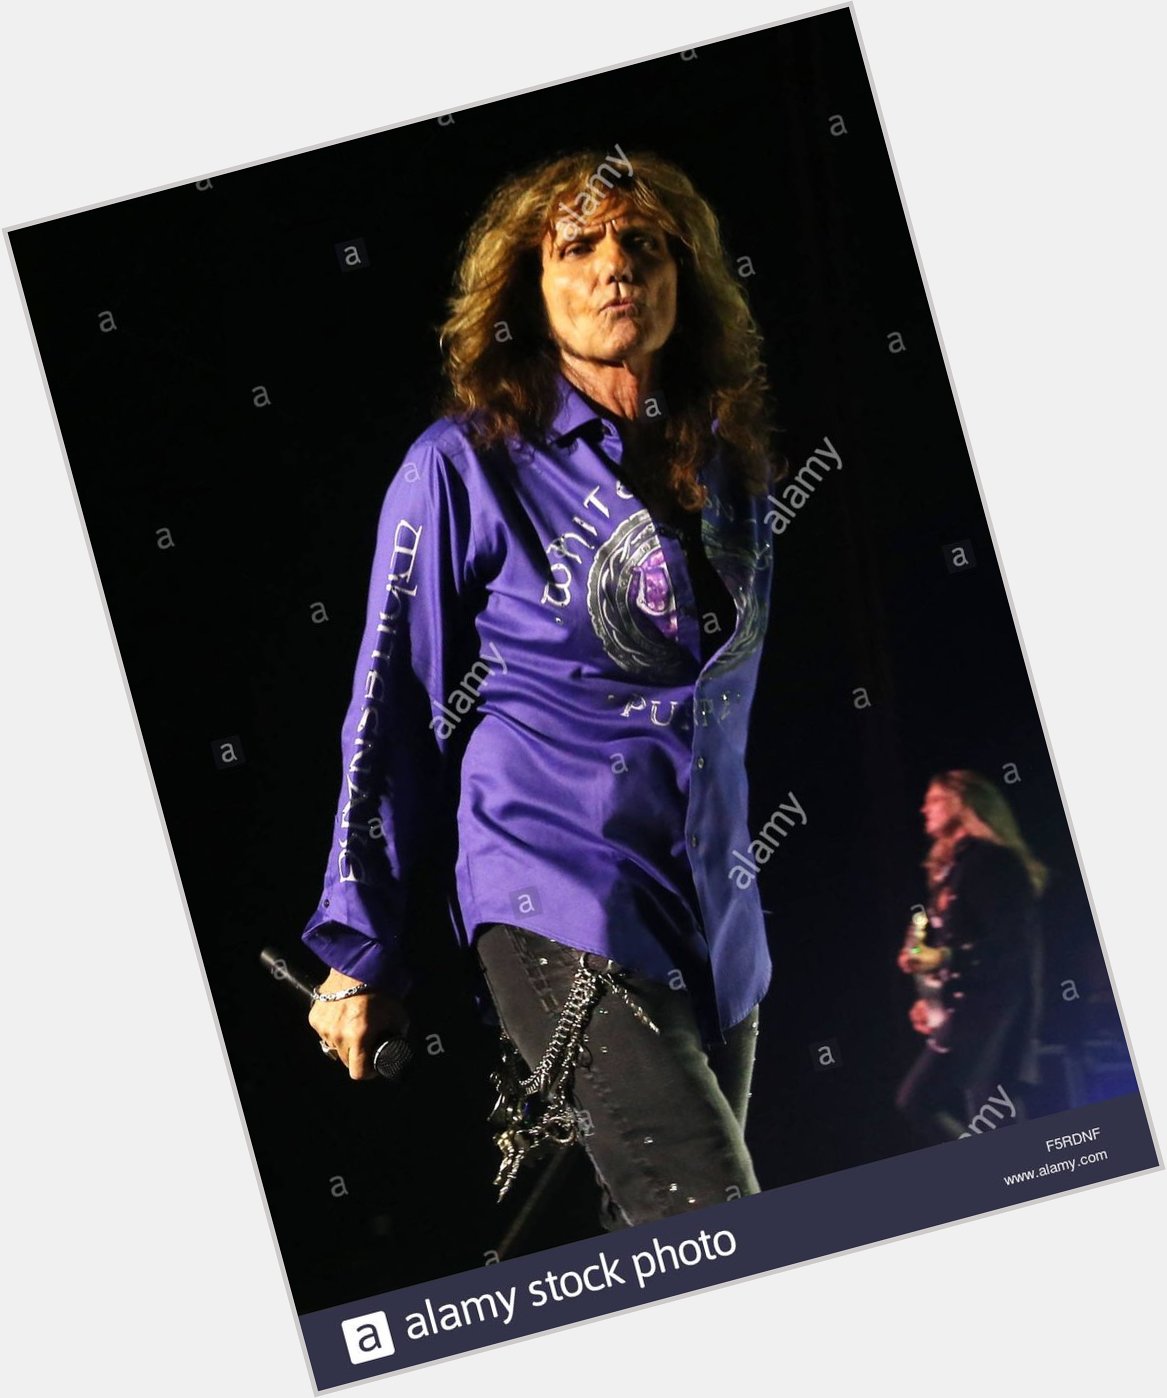 Happy birthday wishes for David Coverdale, Hope he has an amazing day!! 